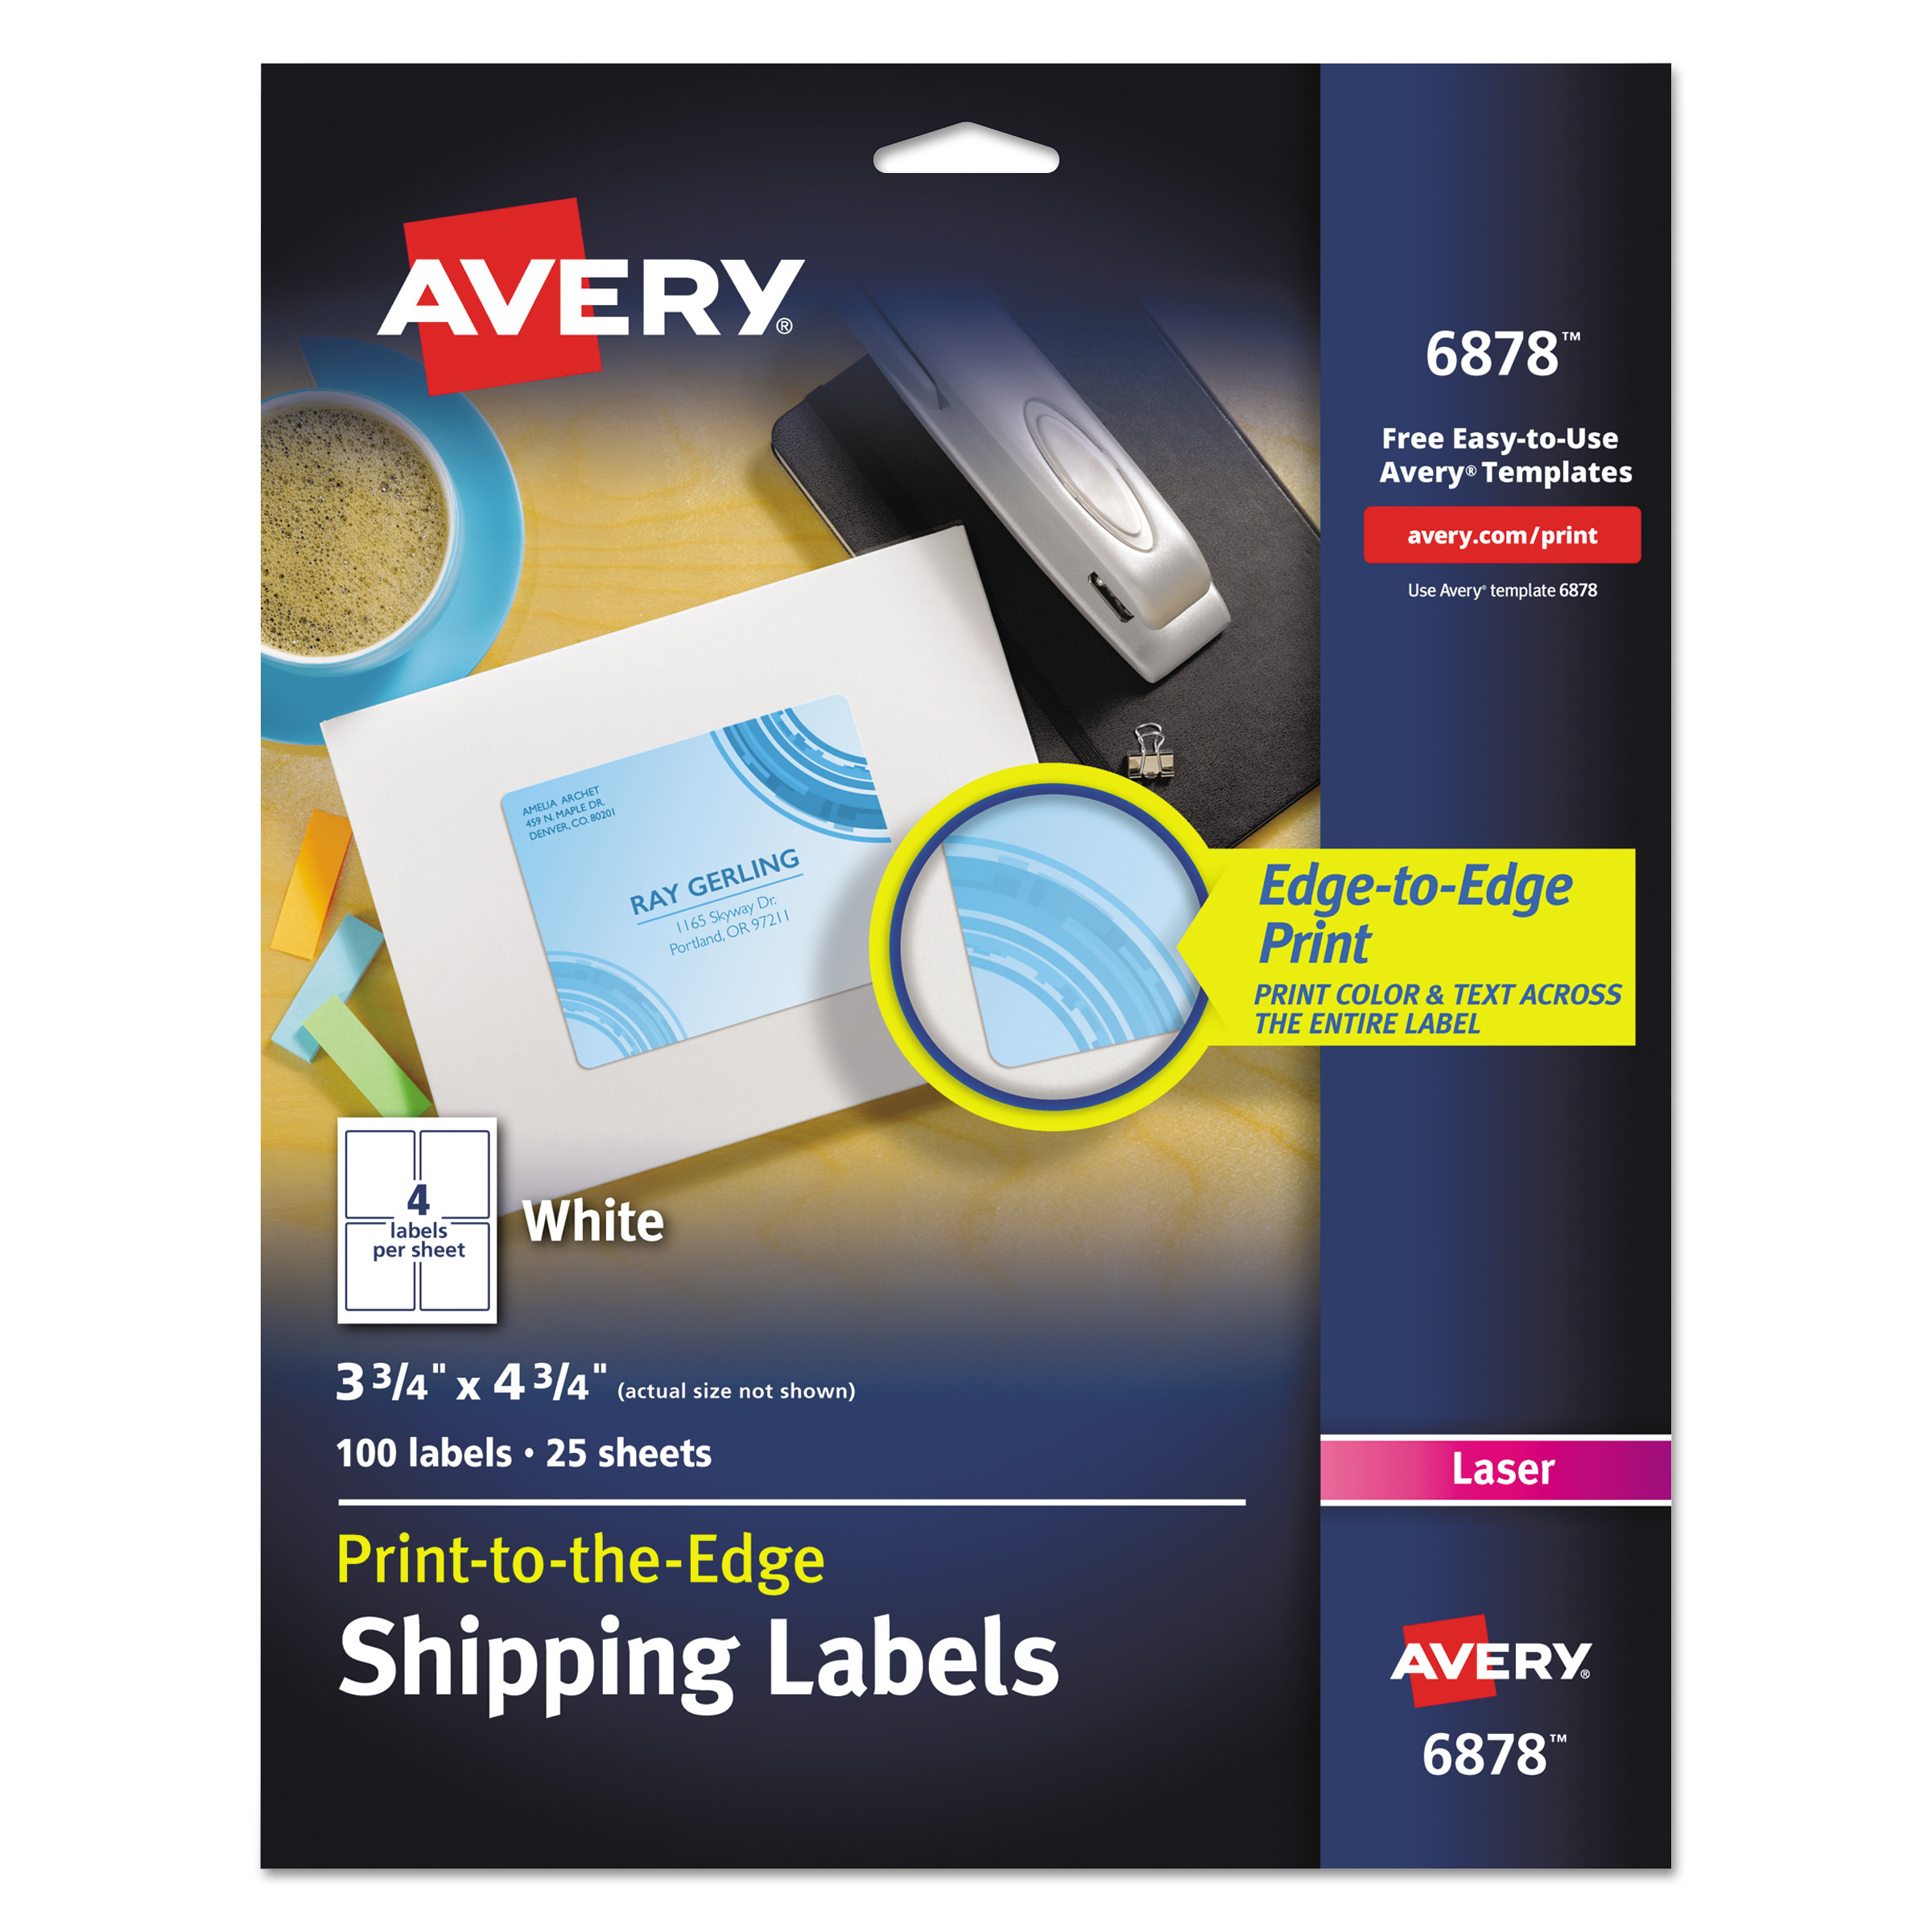  Avery 06878 Vibrant Laser Color-Print Labels with Sure Feed, 3 3/4 x 4 3/4, White, 100/PK (AVE6878) 